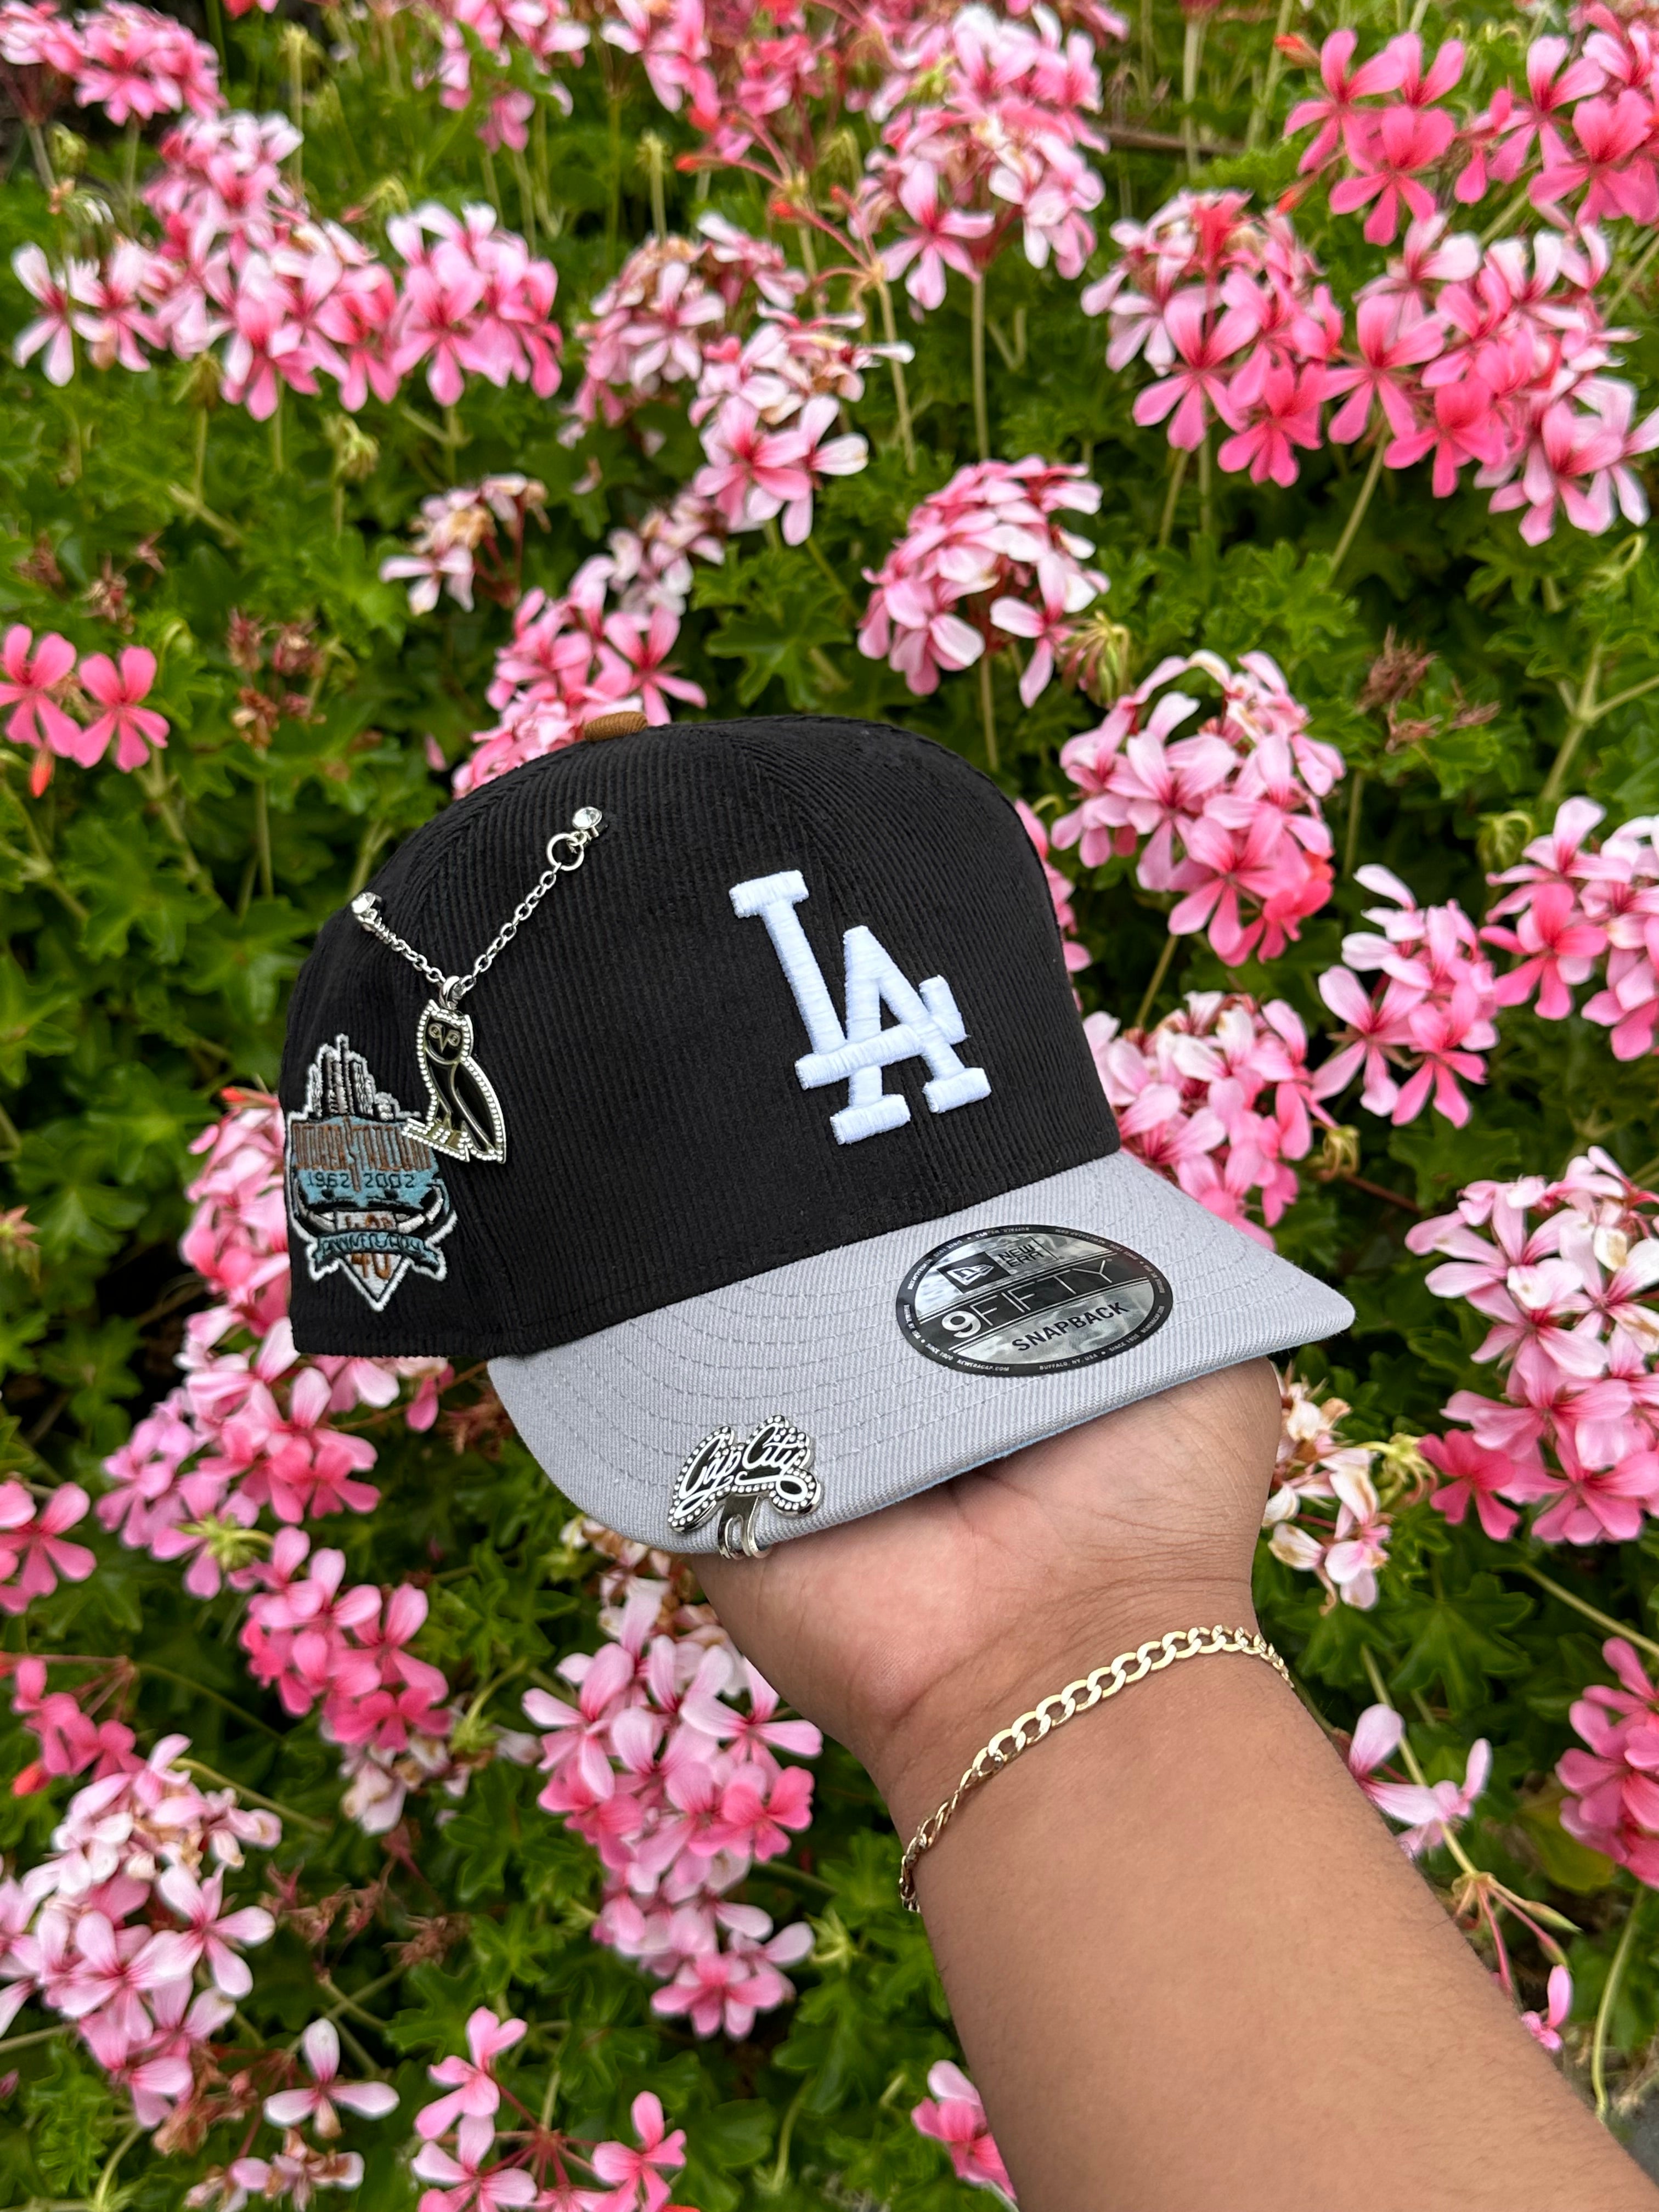 NEW ERA EXCLUSIVE 9FIFTY CORDUROY/GREY LOS ANGELES DODGERS SNAPBACK W/ 40TH ANNIVERSARY PATCH